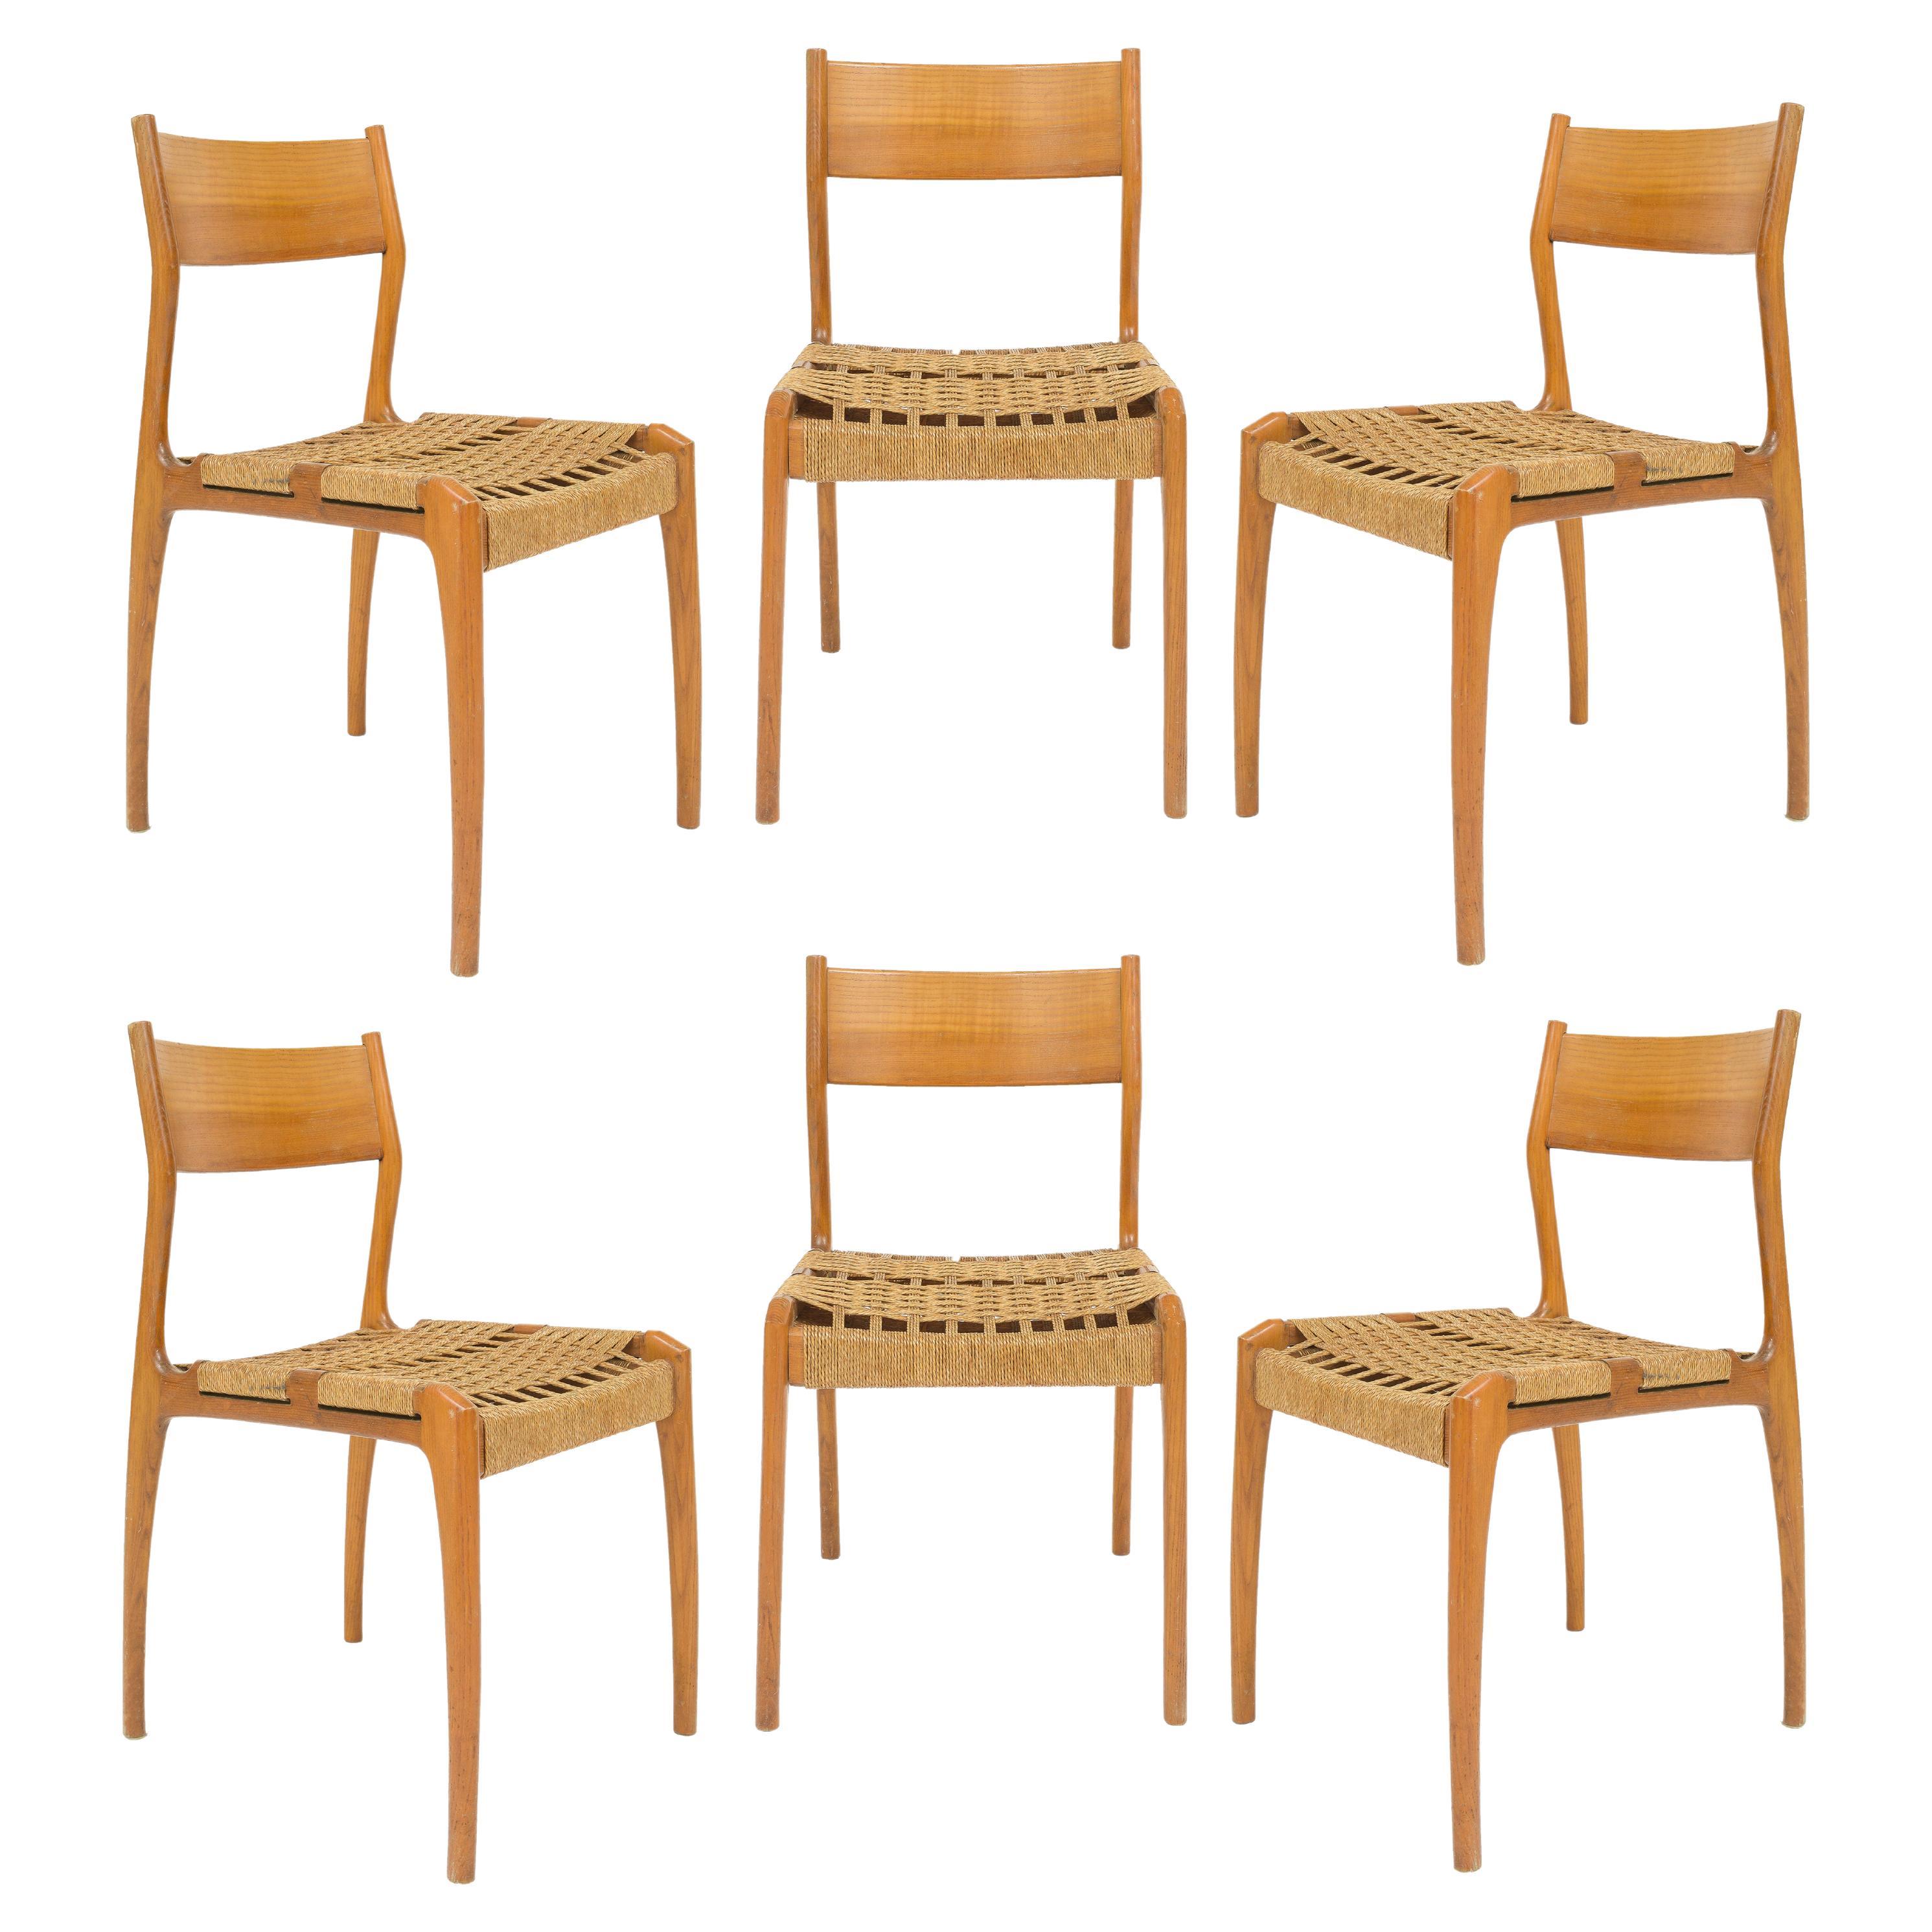 6 Italian Dining Chairs with Woven Rush Seating, 1960's France